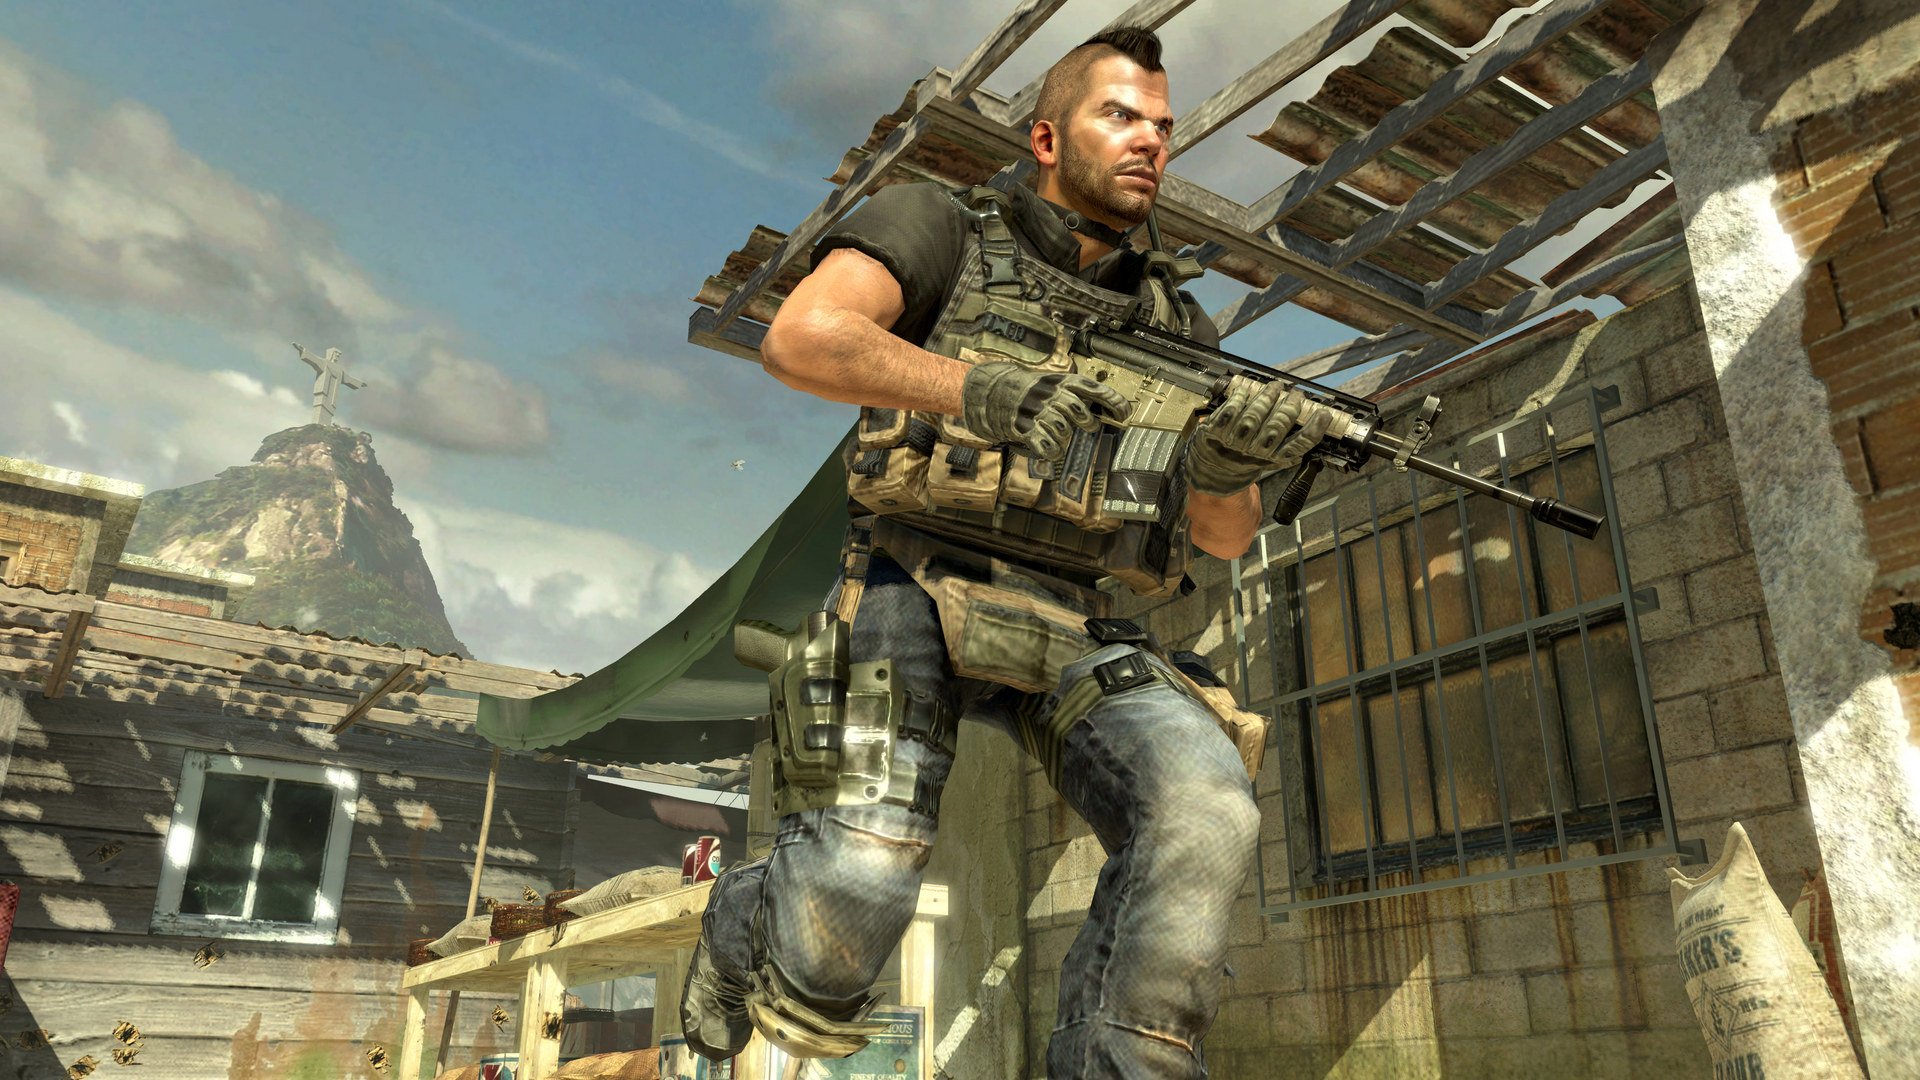 March's free video games include a new 'Call of Duty' and some